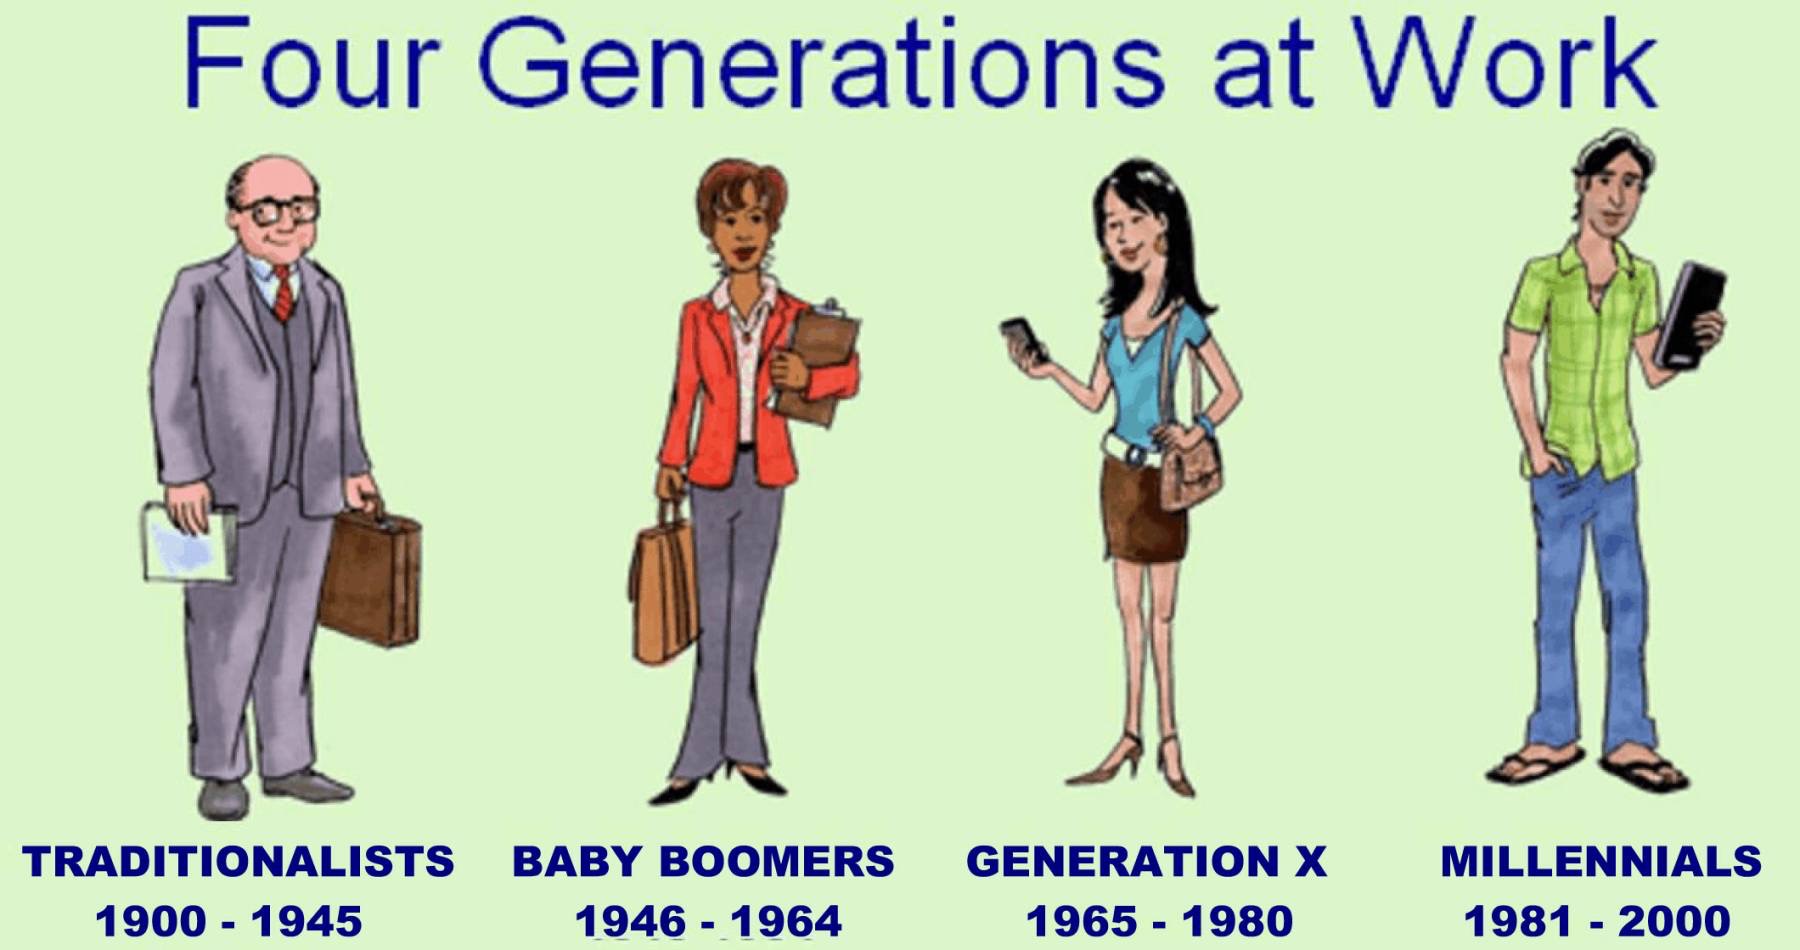 Traditionalists, Baby-Boomers, Generation X & Millennials